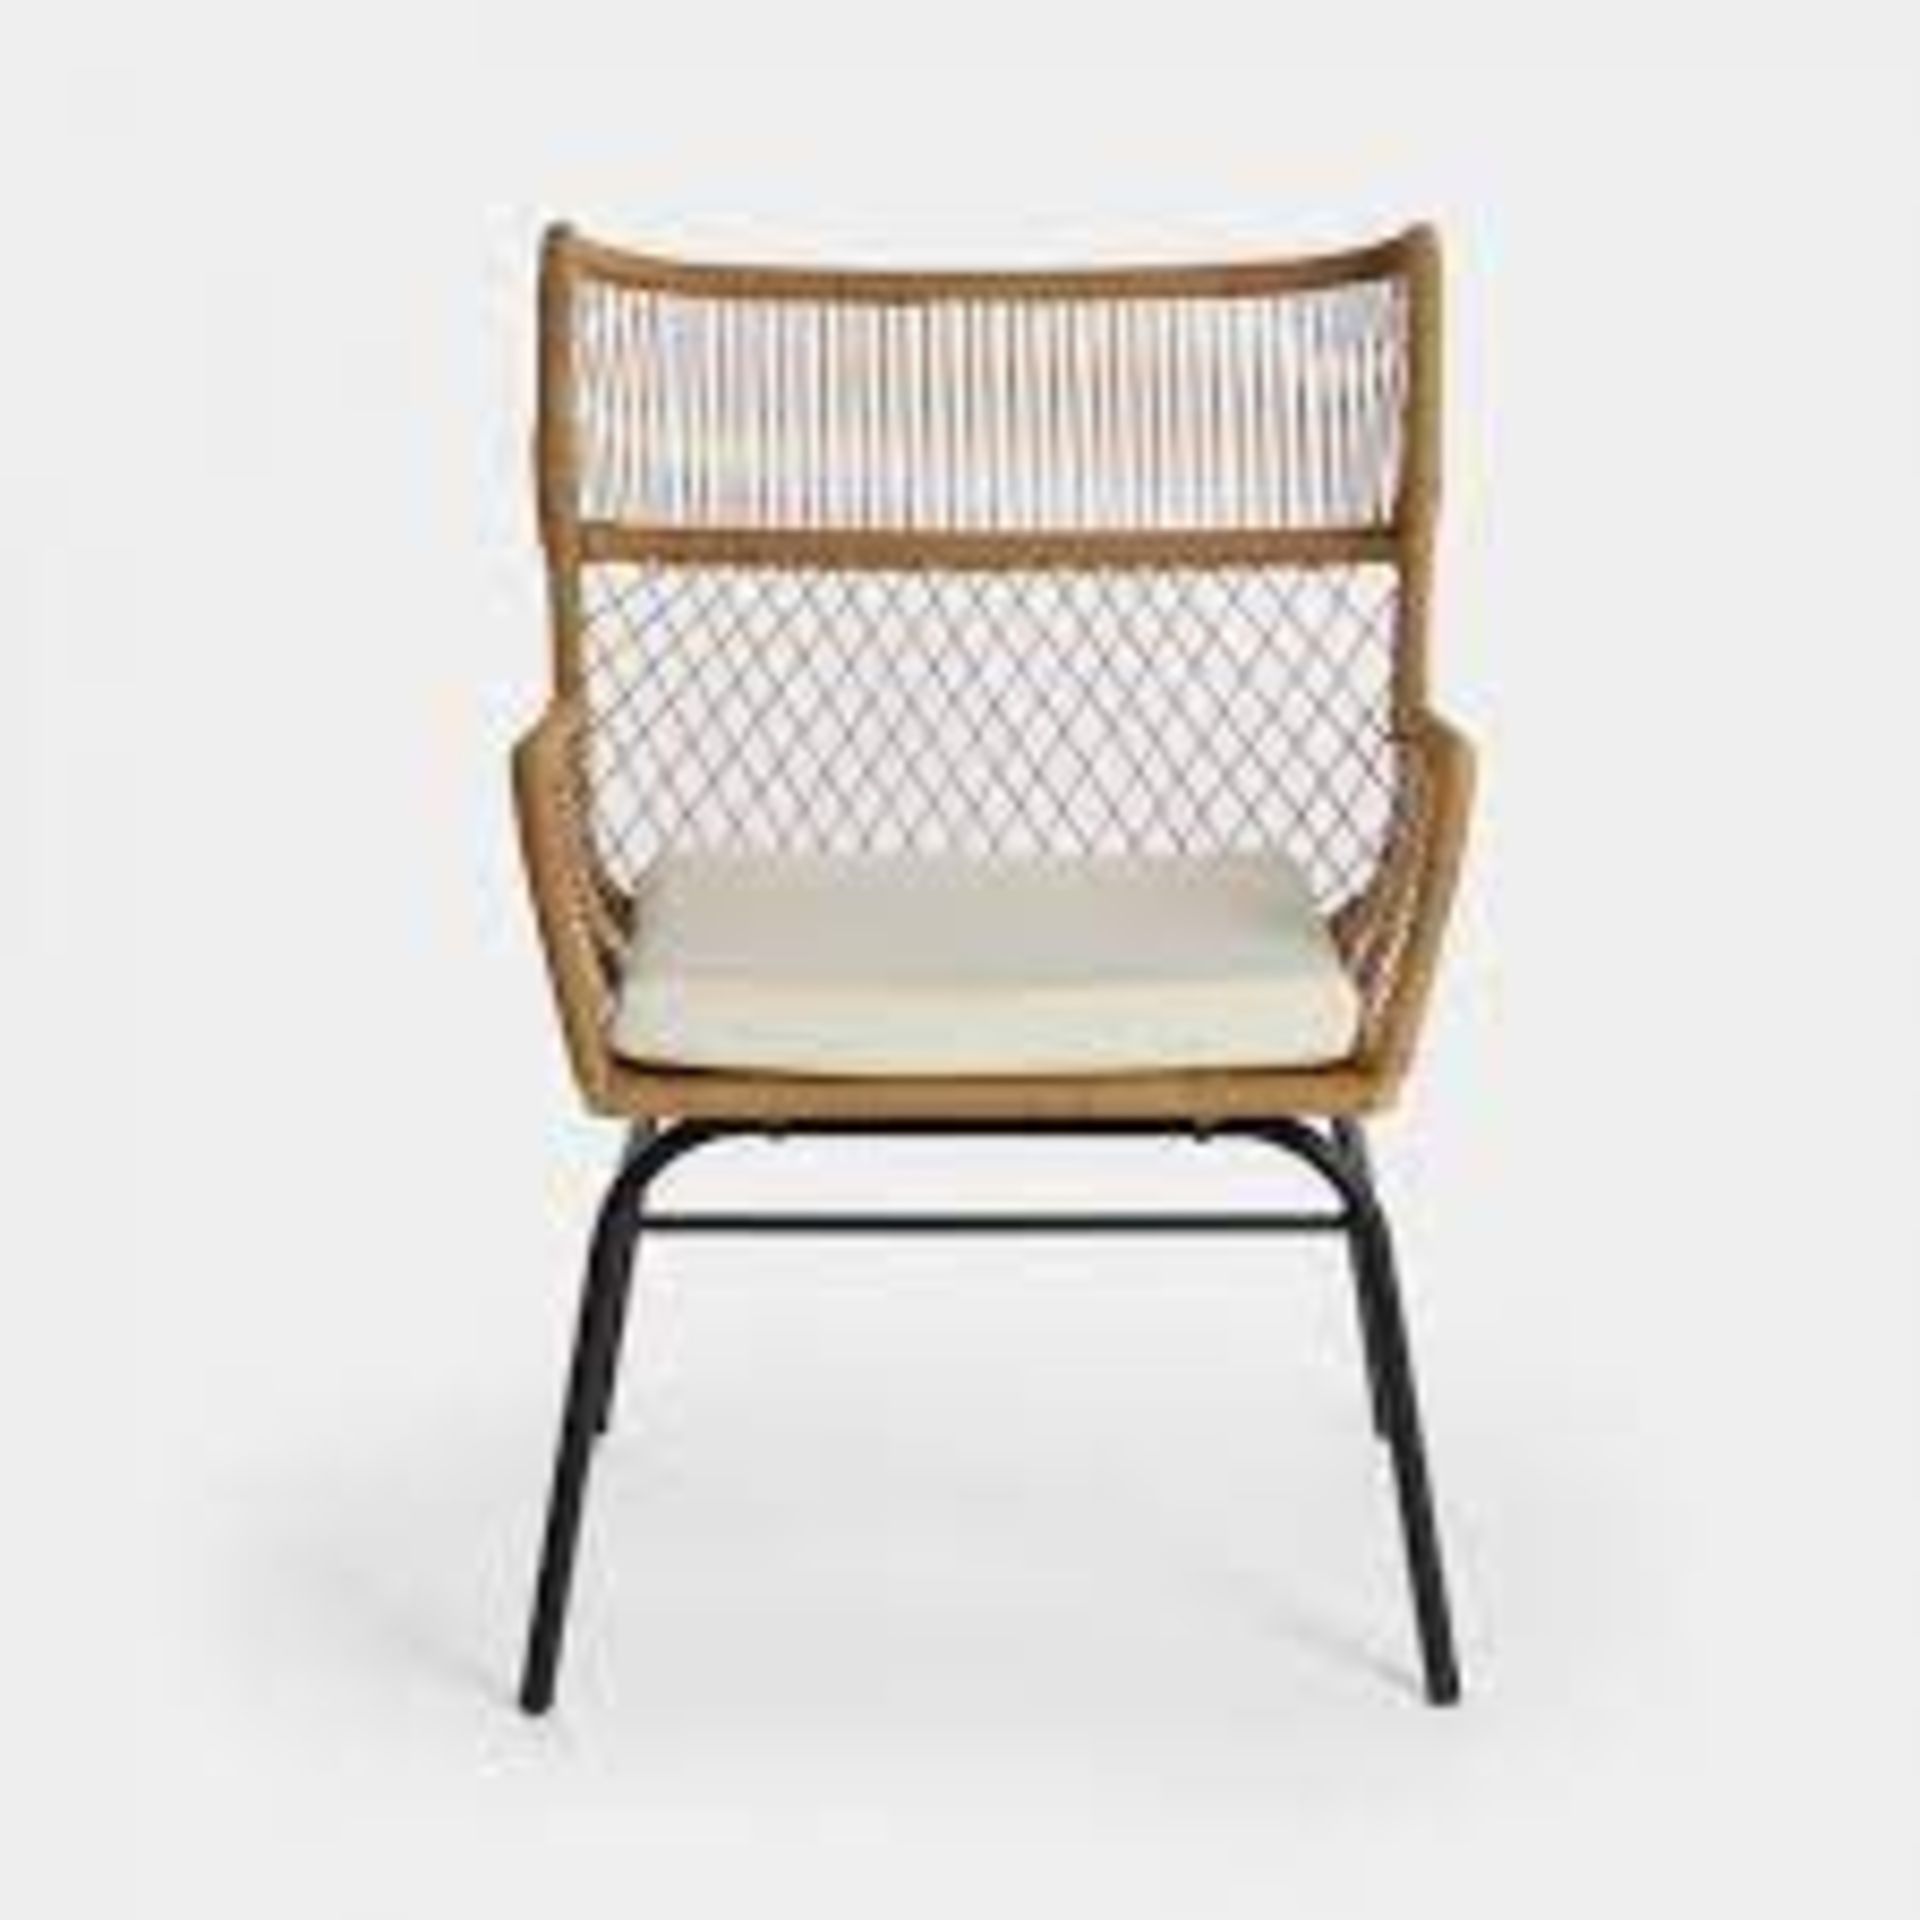 Wingback Cane Style Rattan Chair. - ER42. In a traditional cane design and natural wood colour,